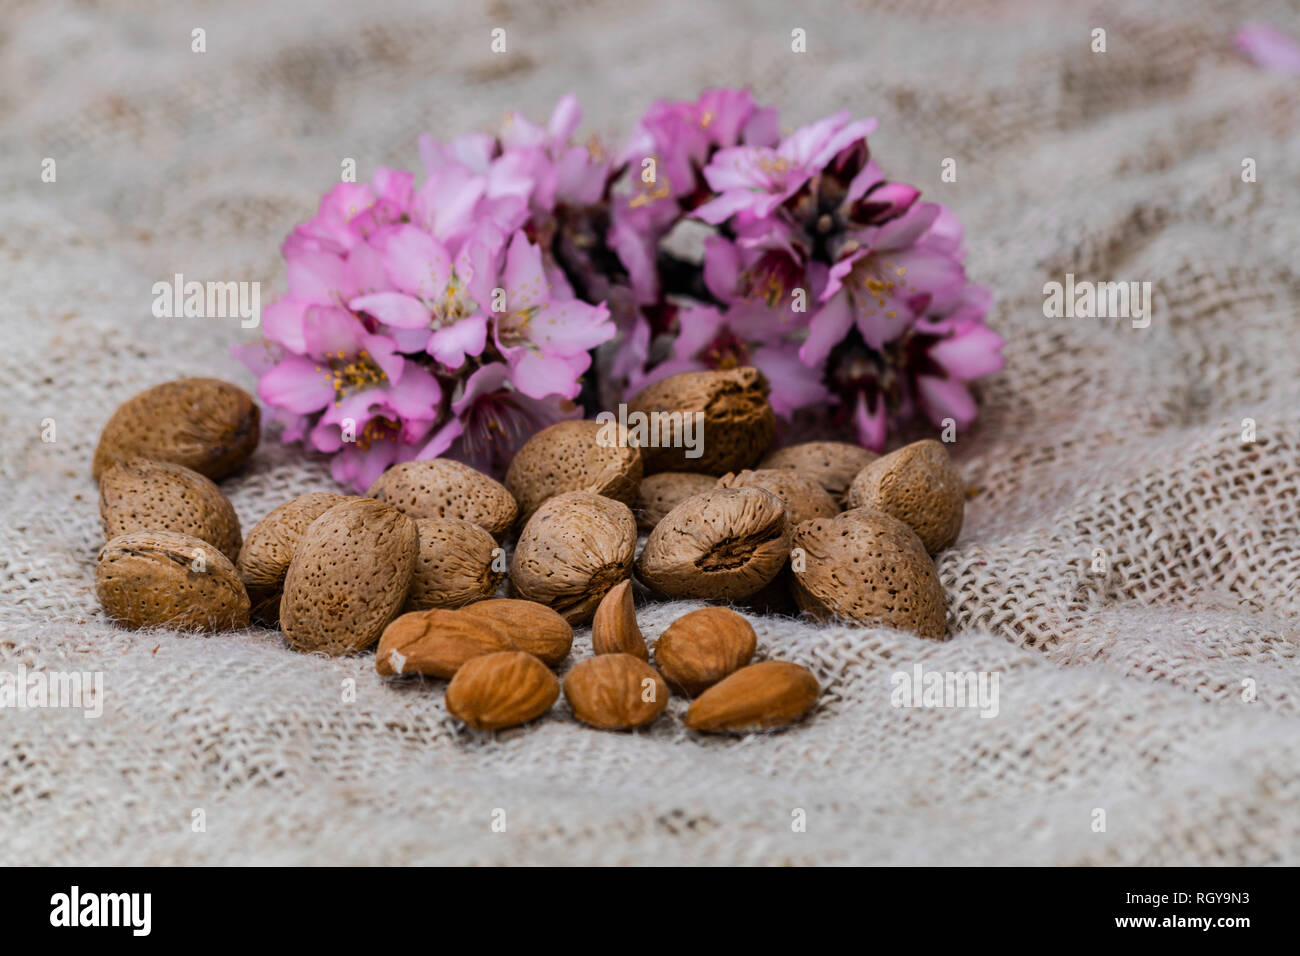 Almonds on sack surface,  with almond flowers background Stock Photo